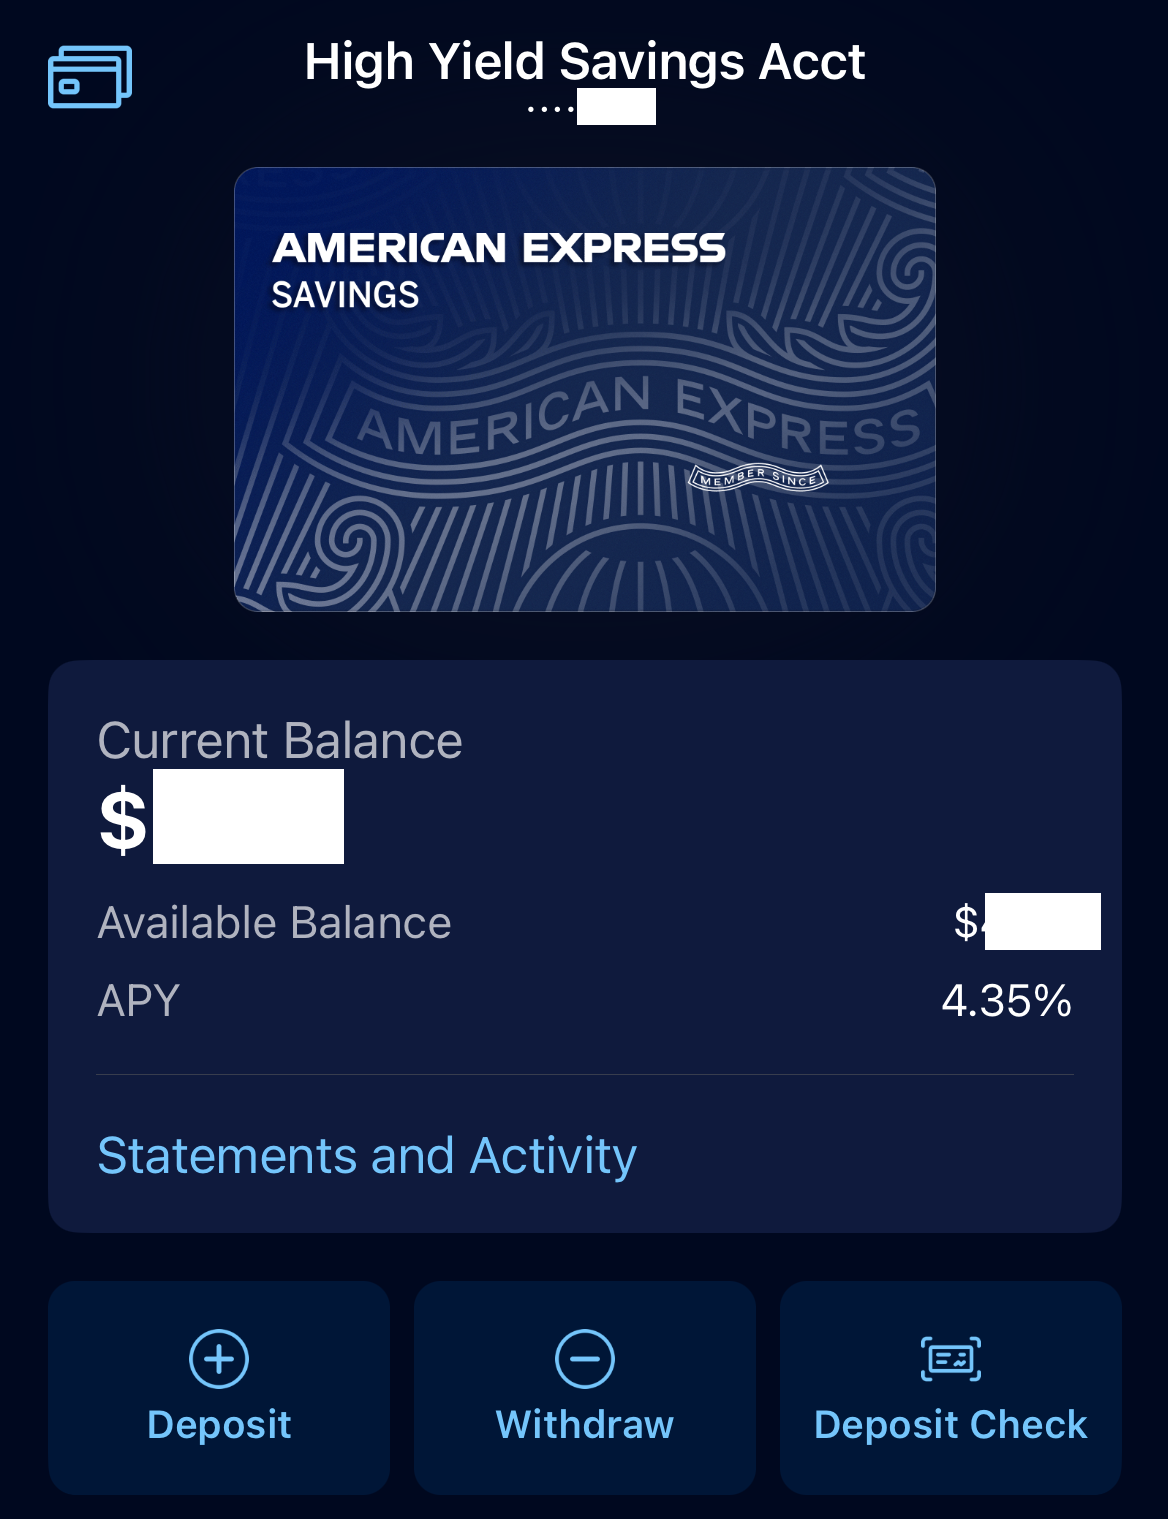 Amex savings overview on app